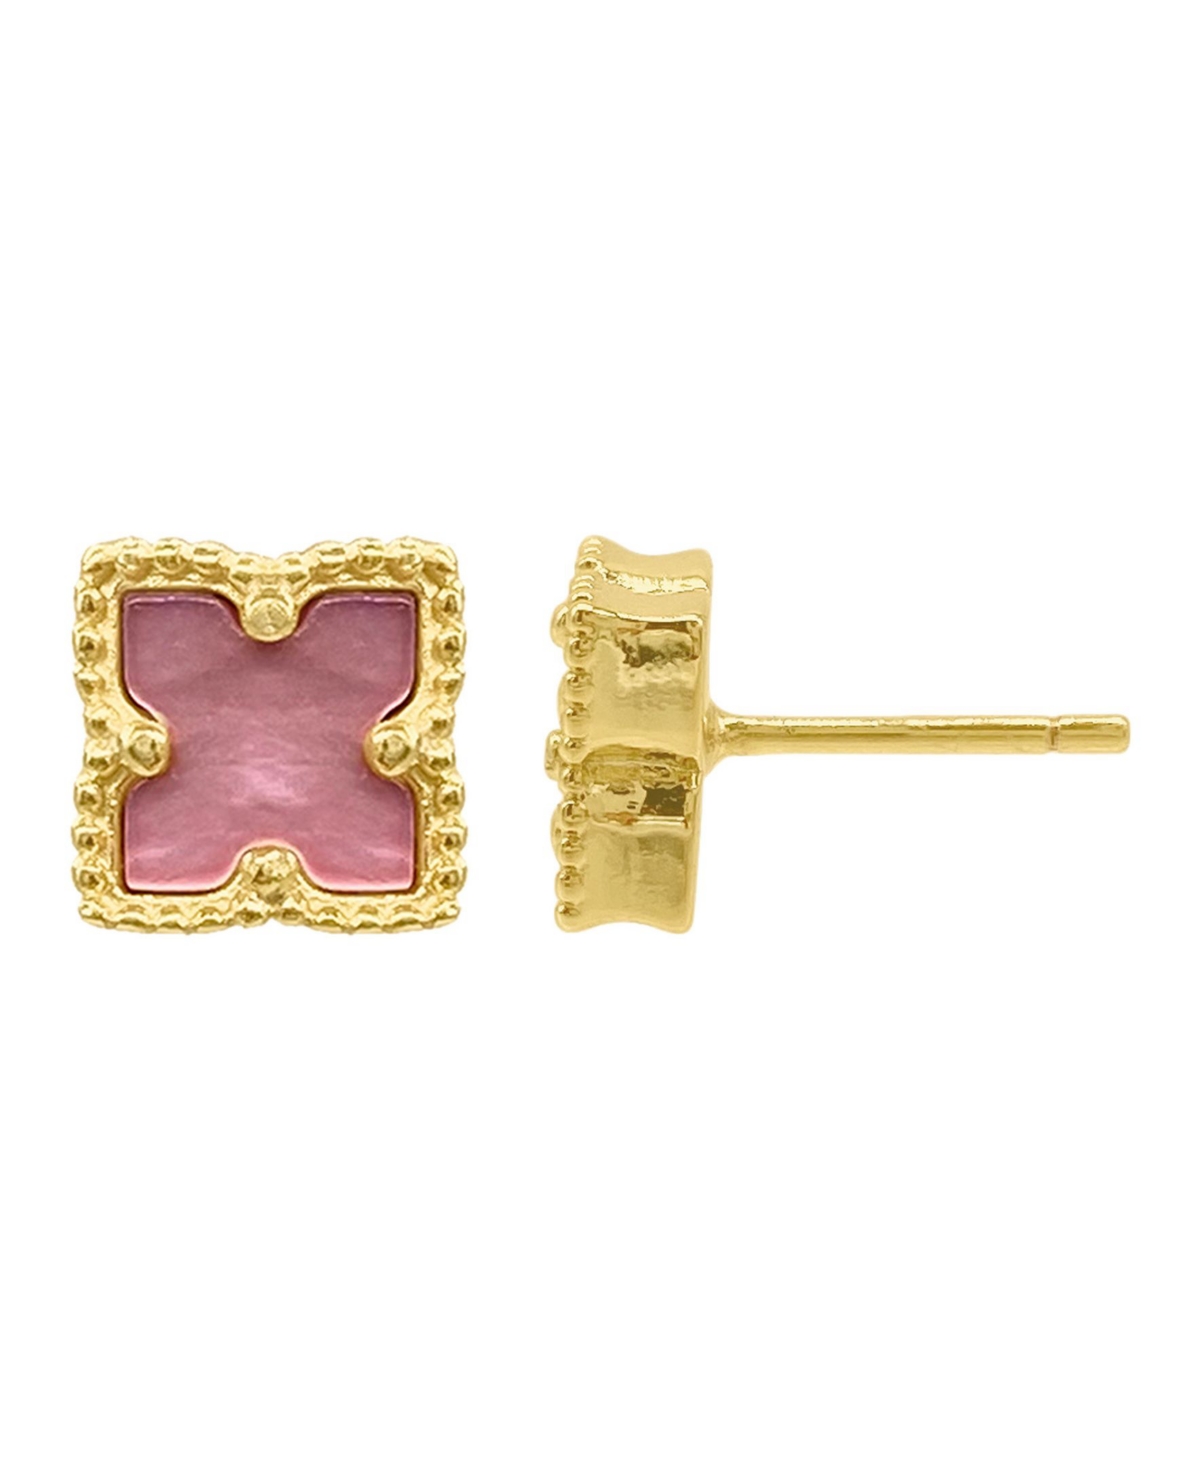 14K Gold Plated Flower Pink Imitation Mother of Pearl Stud Earrings - Pink